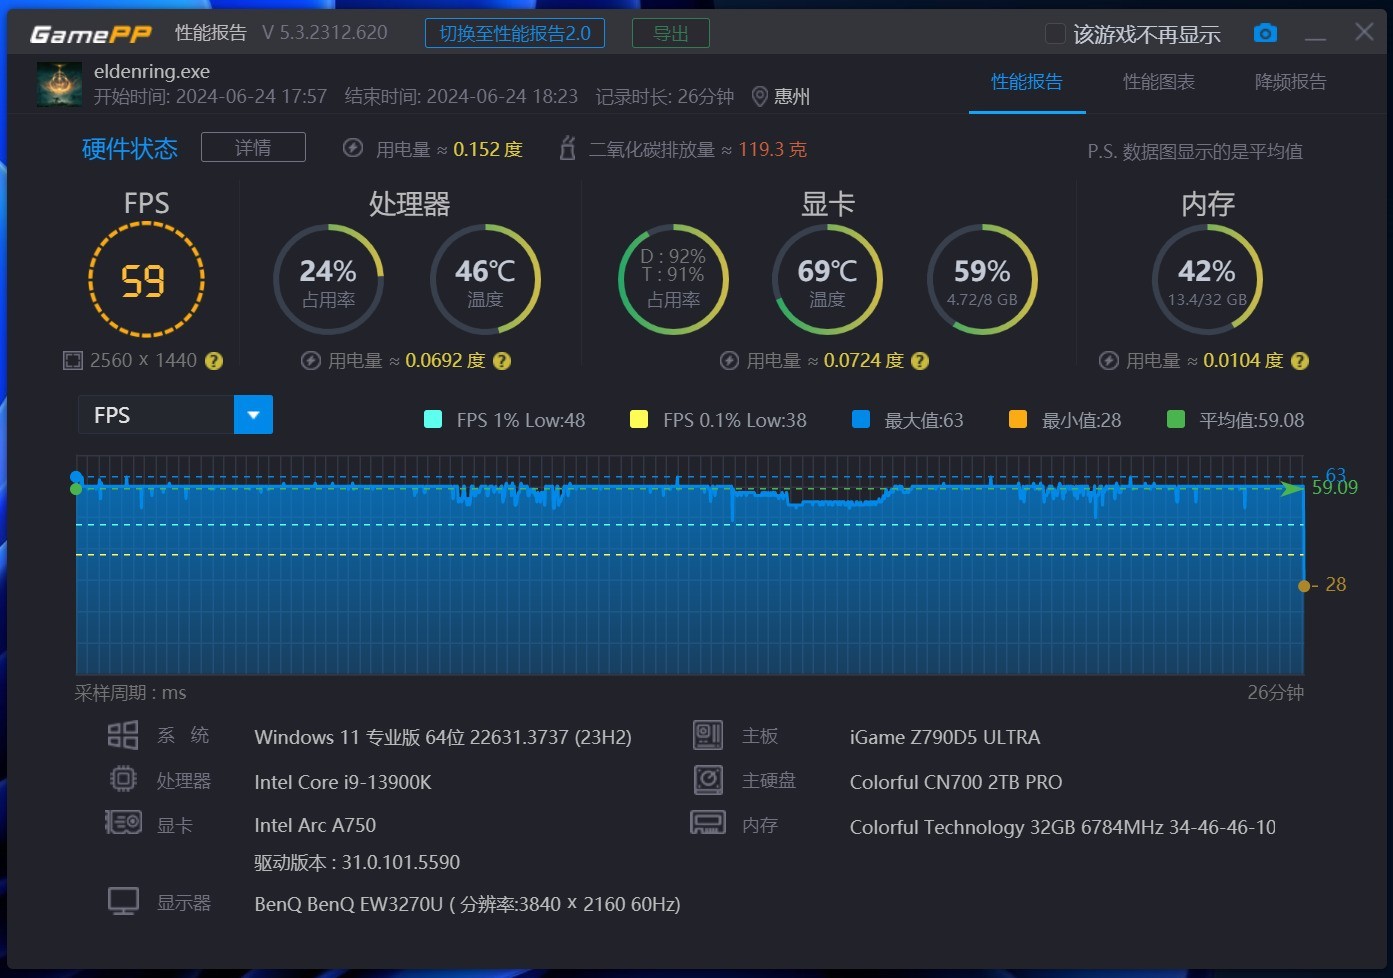  Blue halberd A750 Elden Fahuan DLC co branded graphics card is evaluated to be more cost-effective